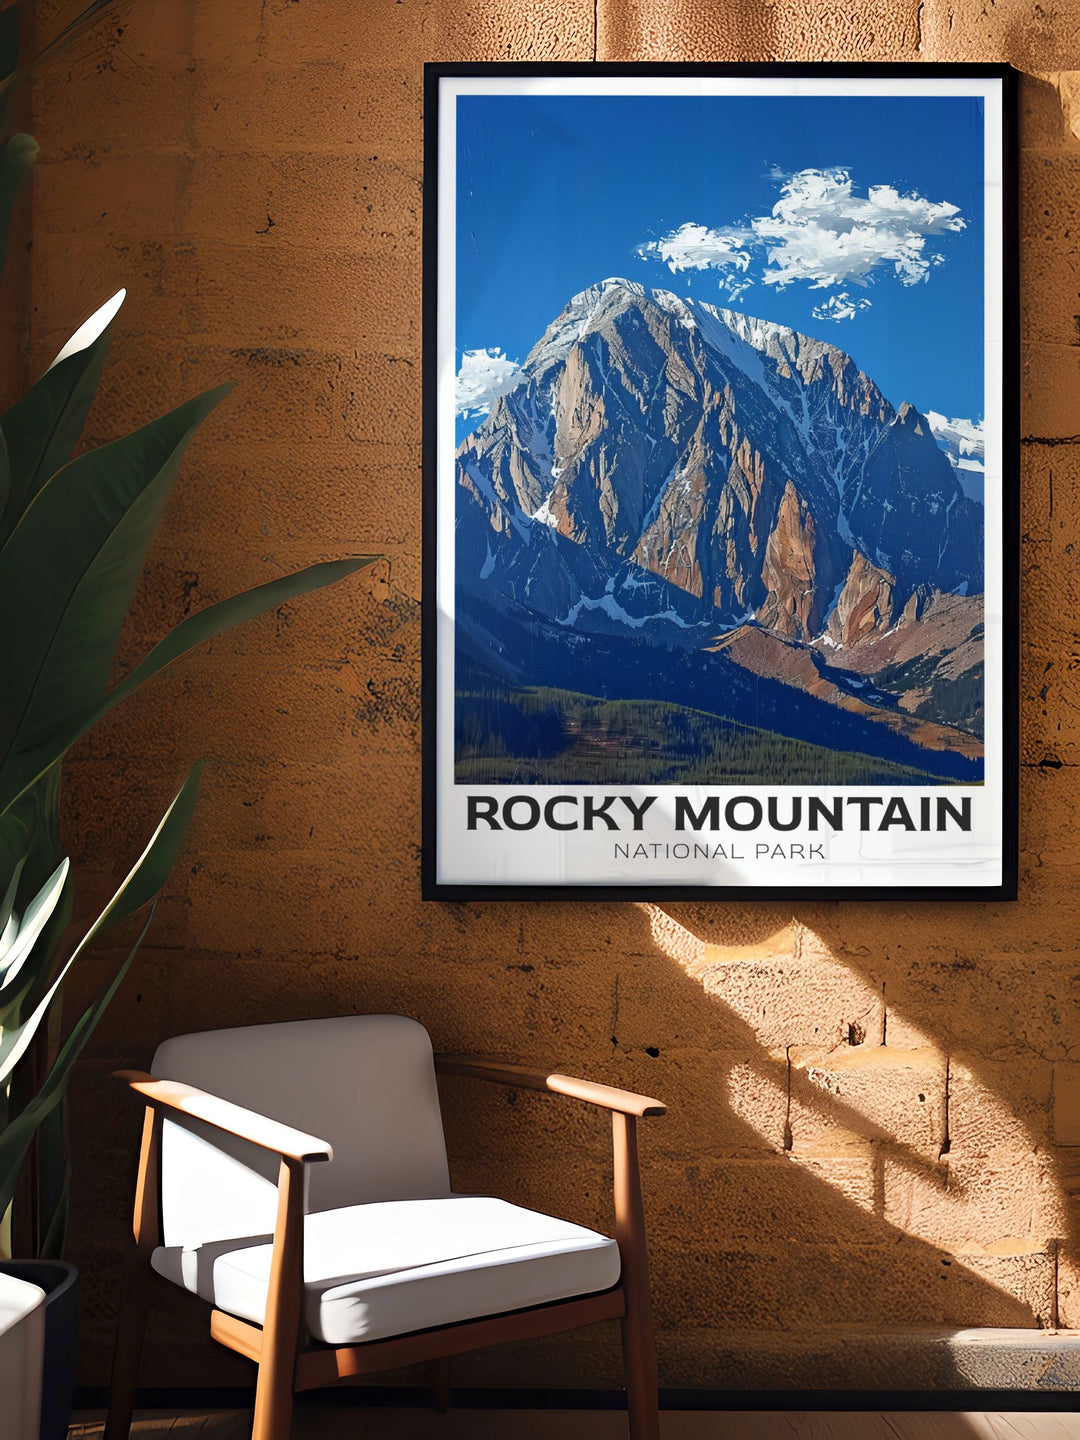 a picture of a rocky mountain hangs on a wall